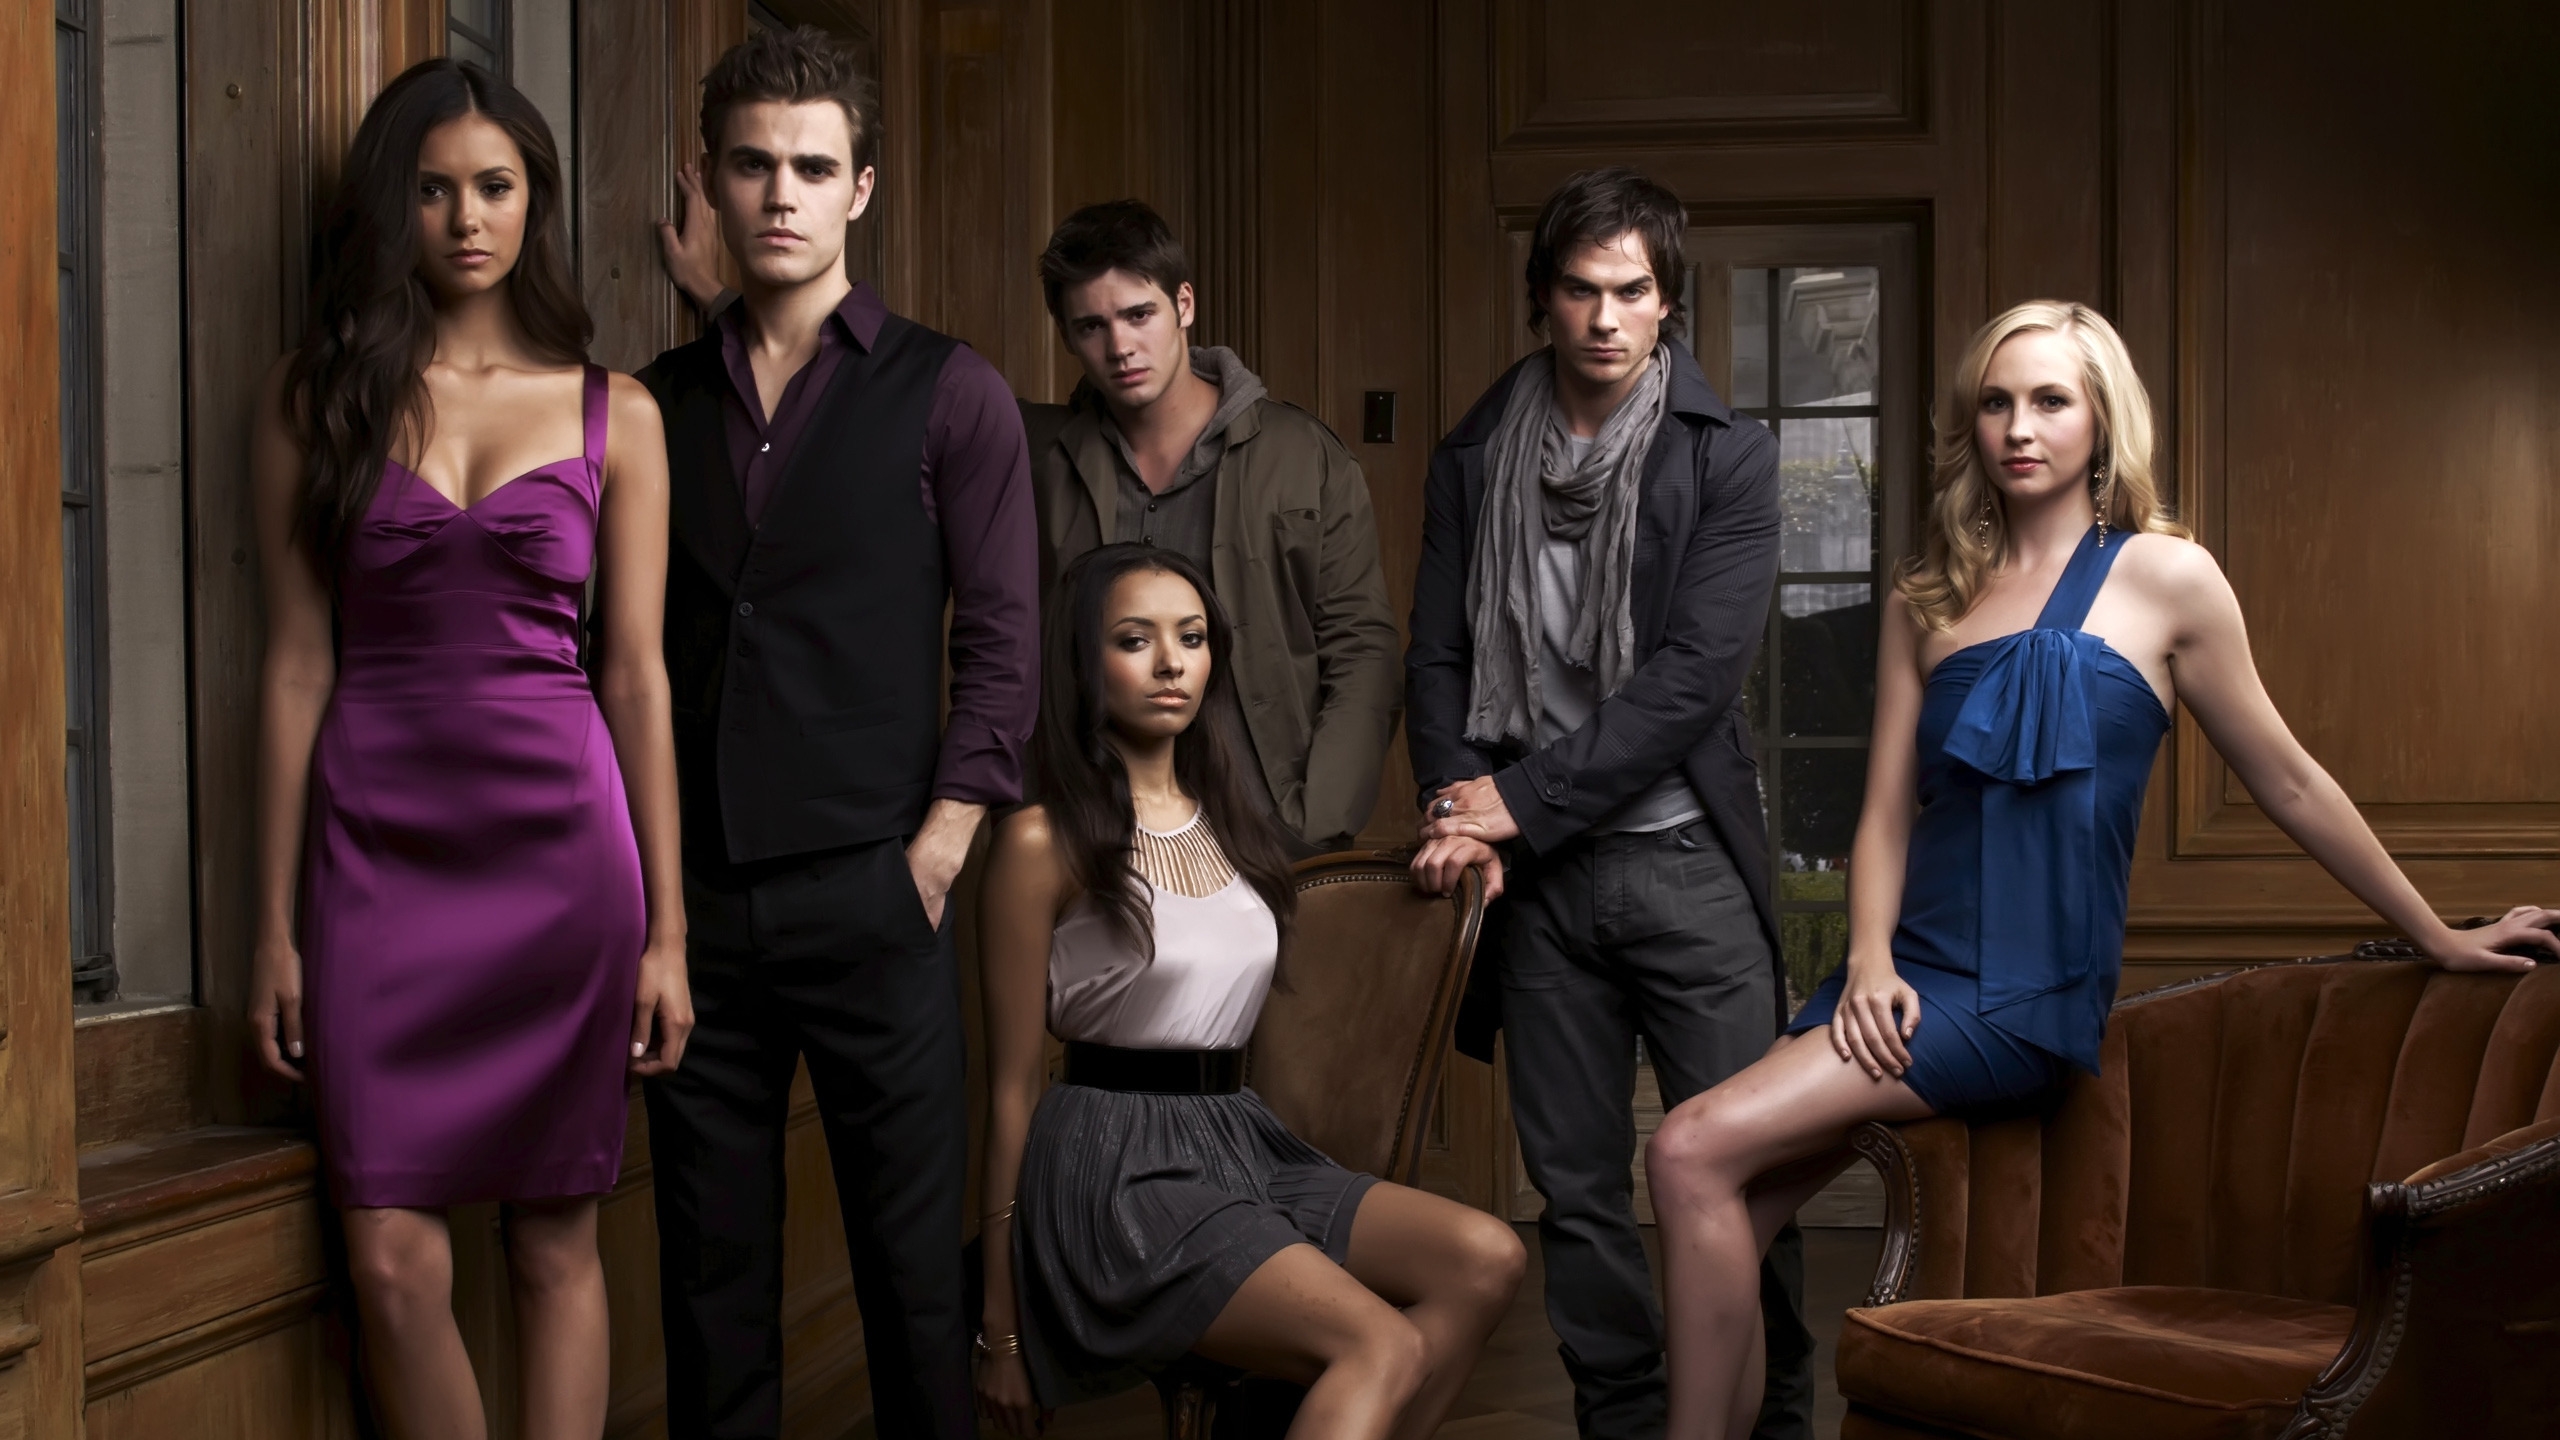 The Vampire Diaries Cast for 2560x1440 HDTV resolution